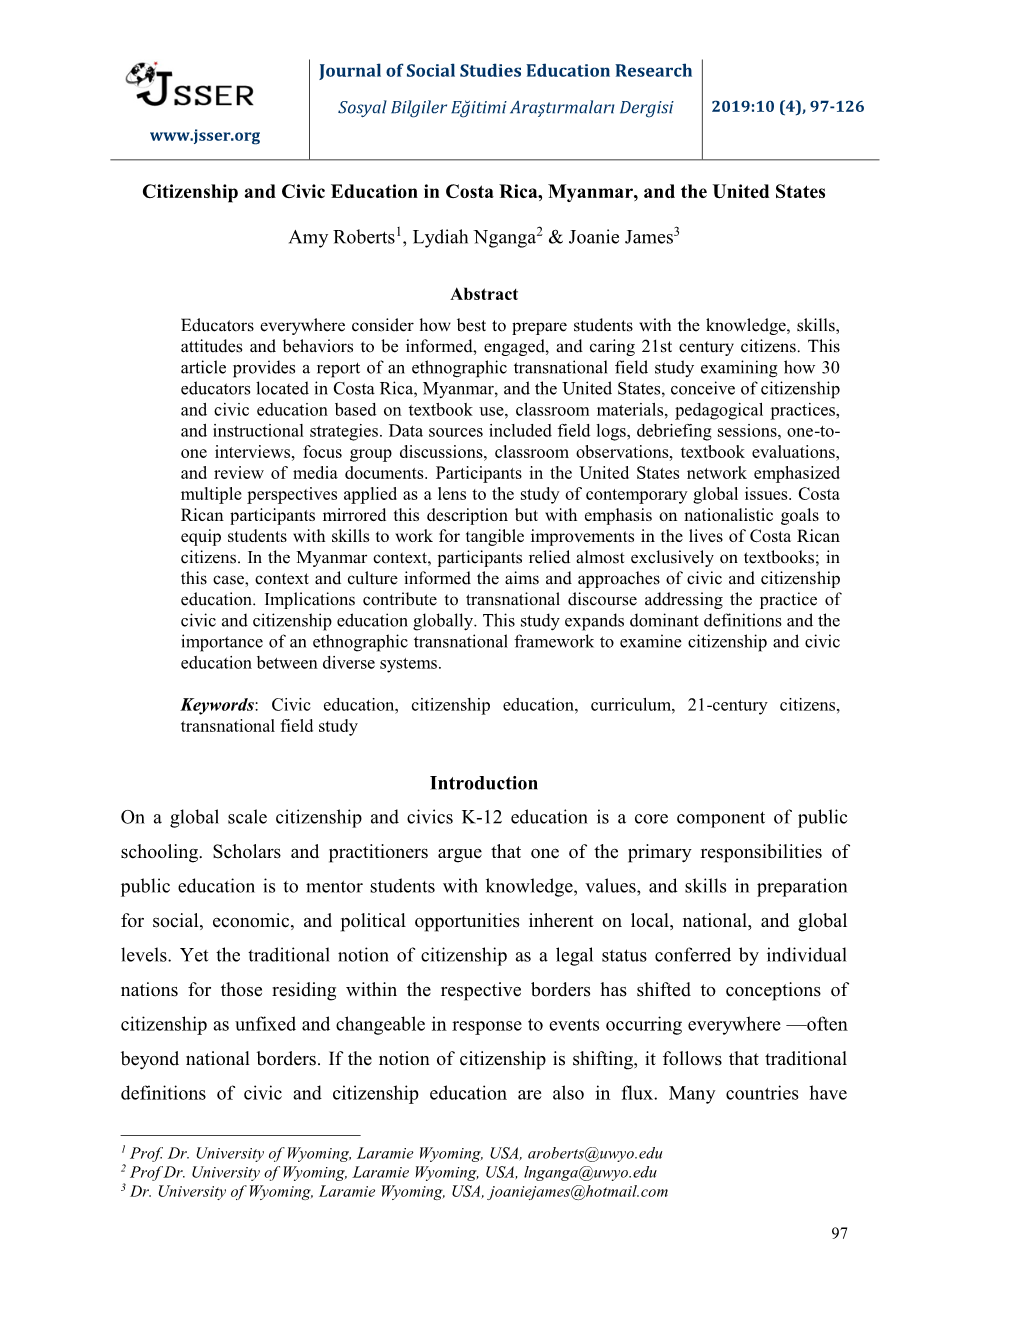 Citizenship and Civic Education in Costa Rica, Myanmar, and the United States